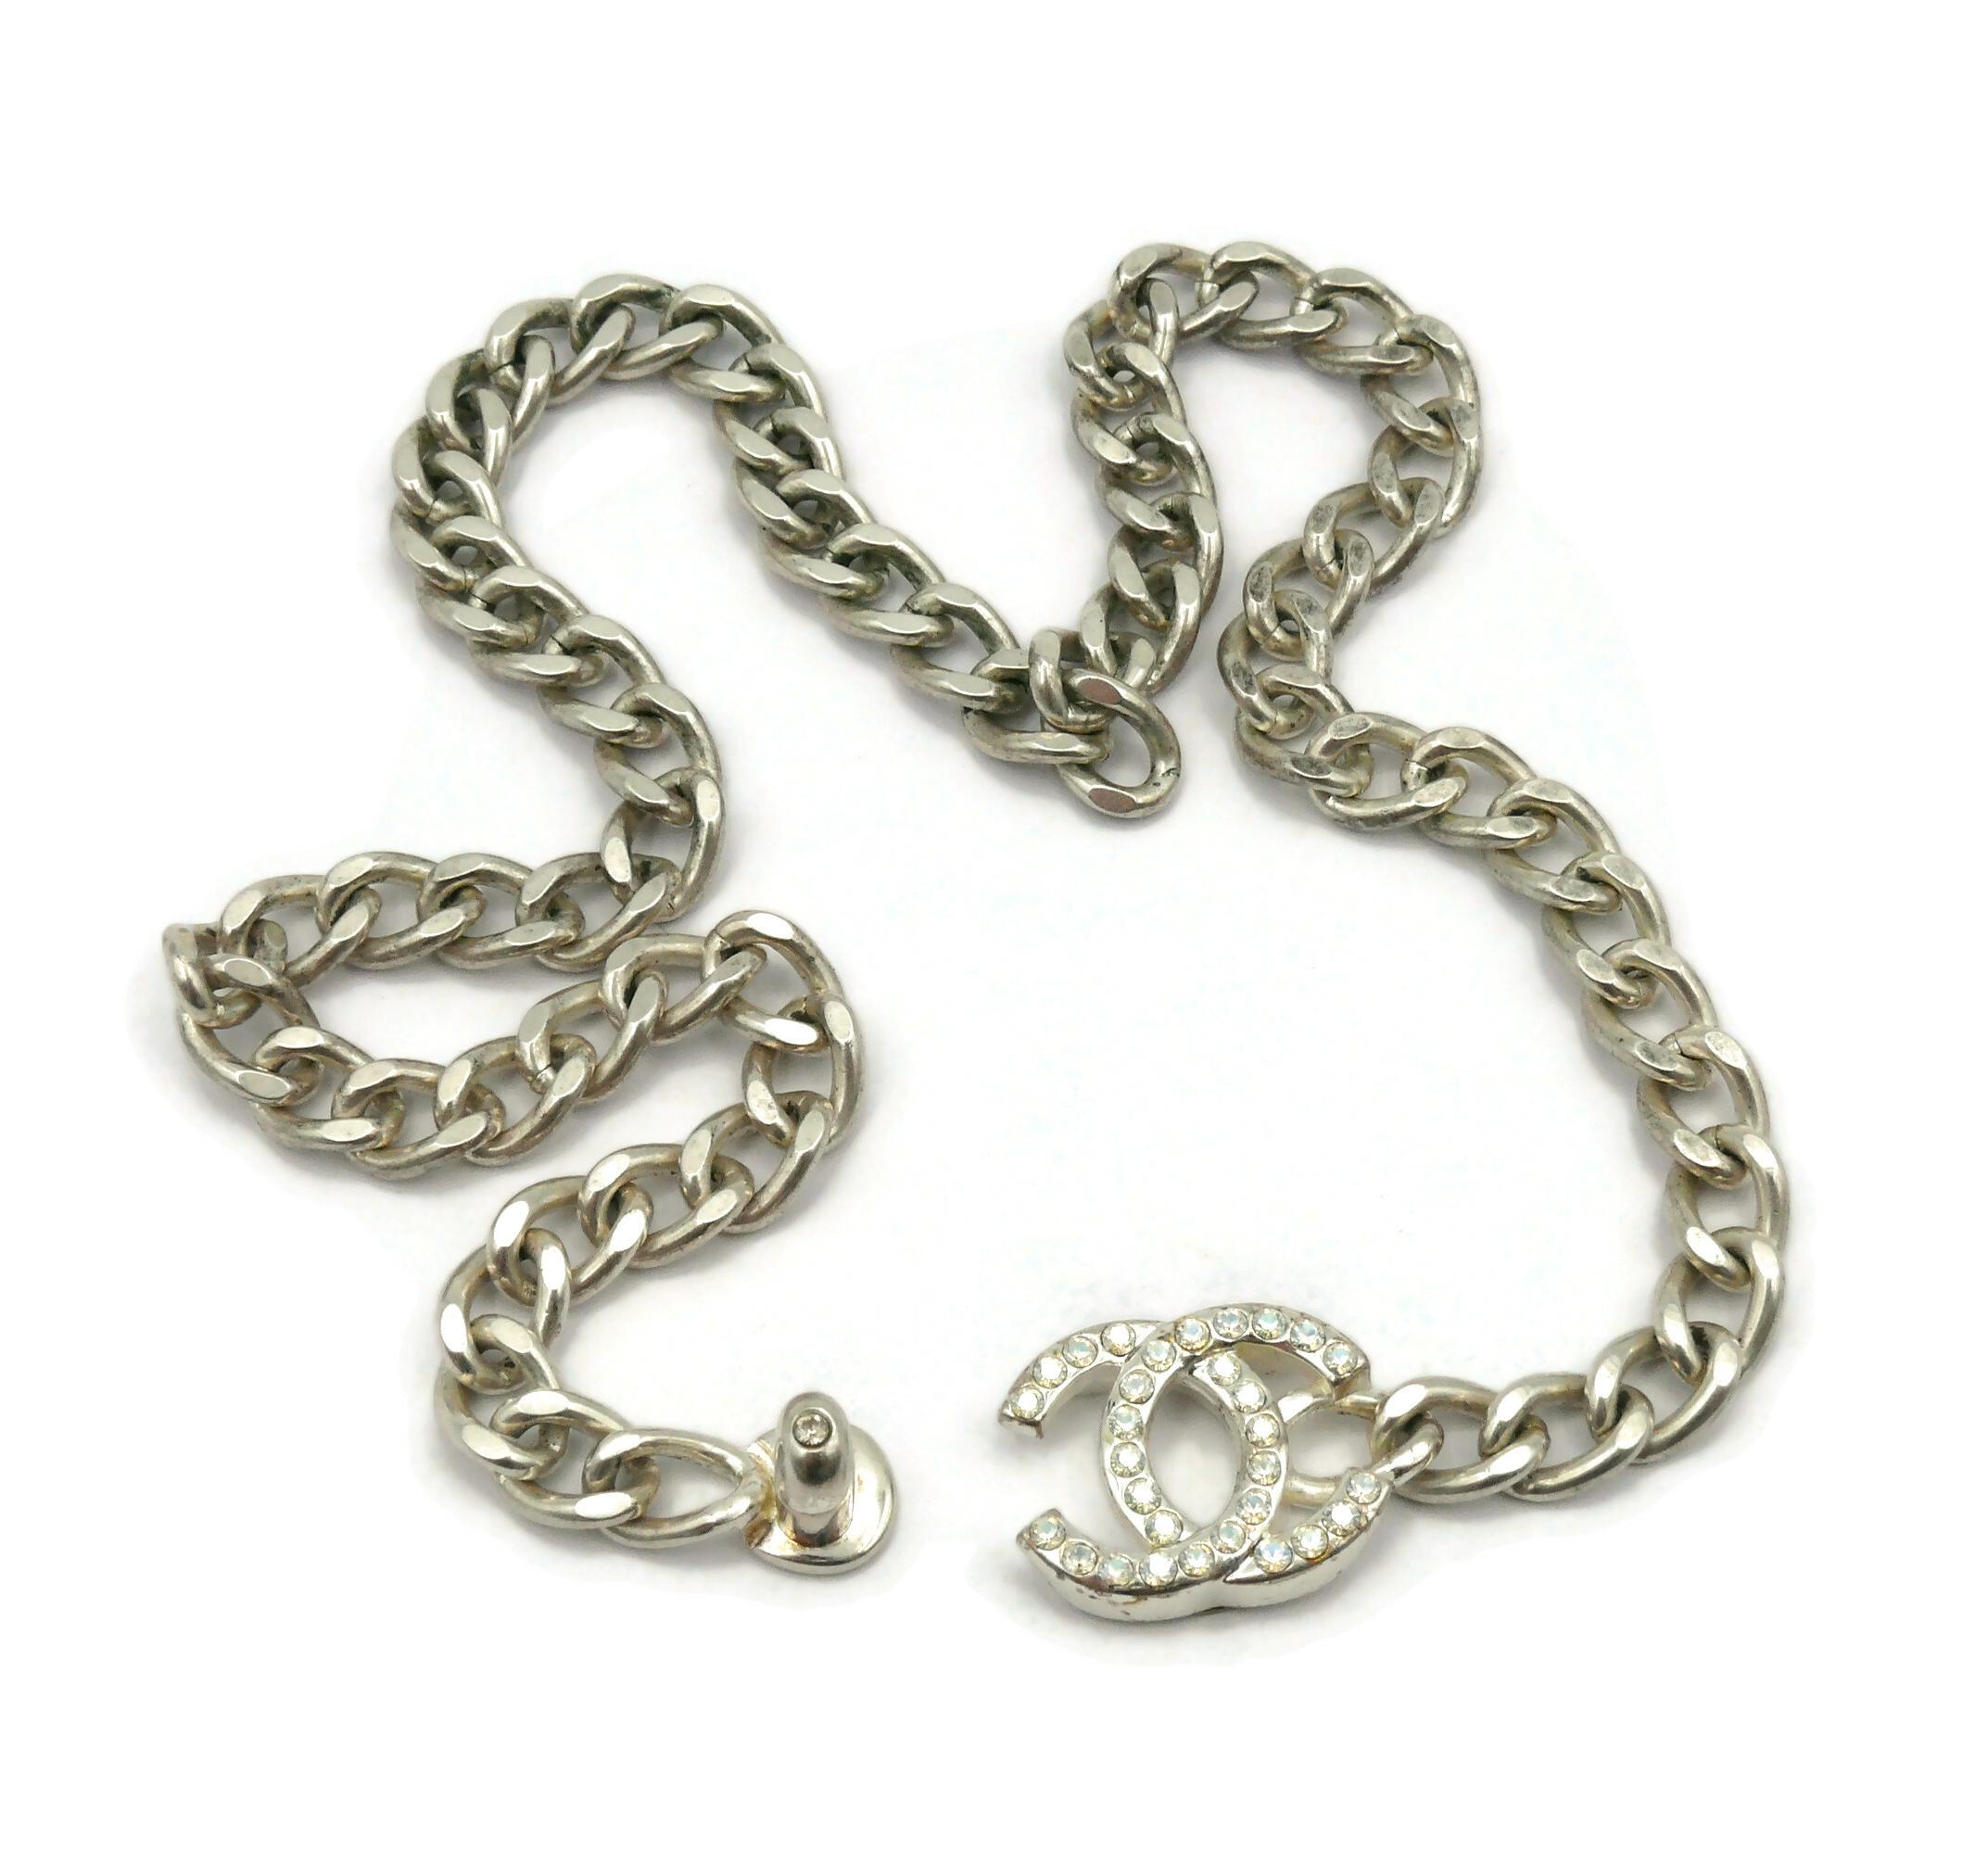 CHANEL by KARL LAGERFELD Vintage 1996 Silver Tone Jewelled Turn-Lock Necklace For Sale 7